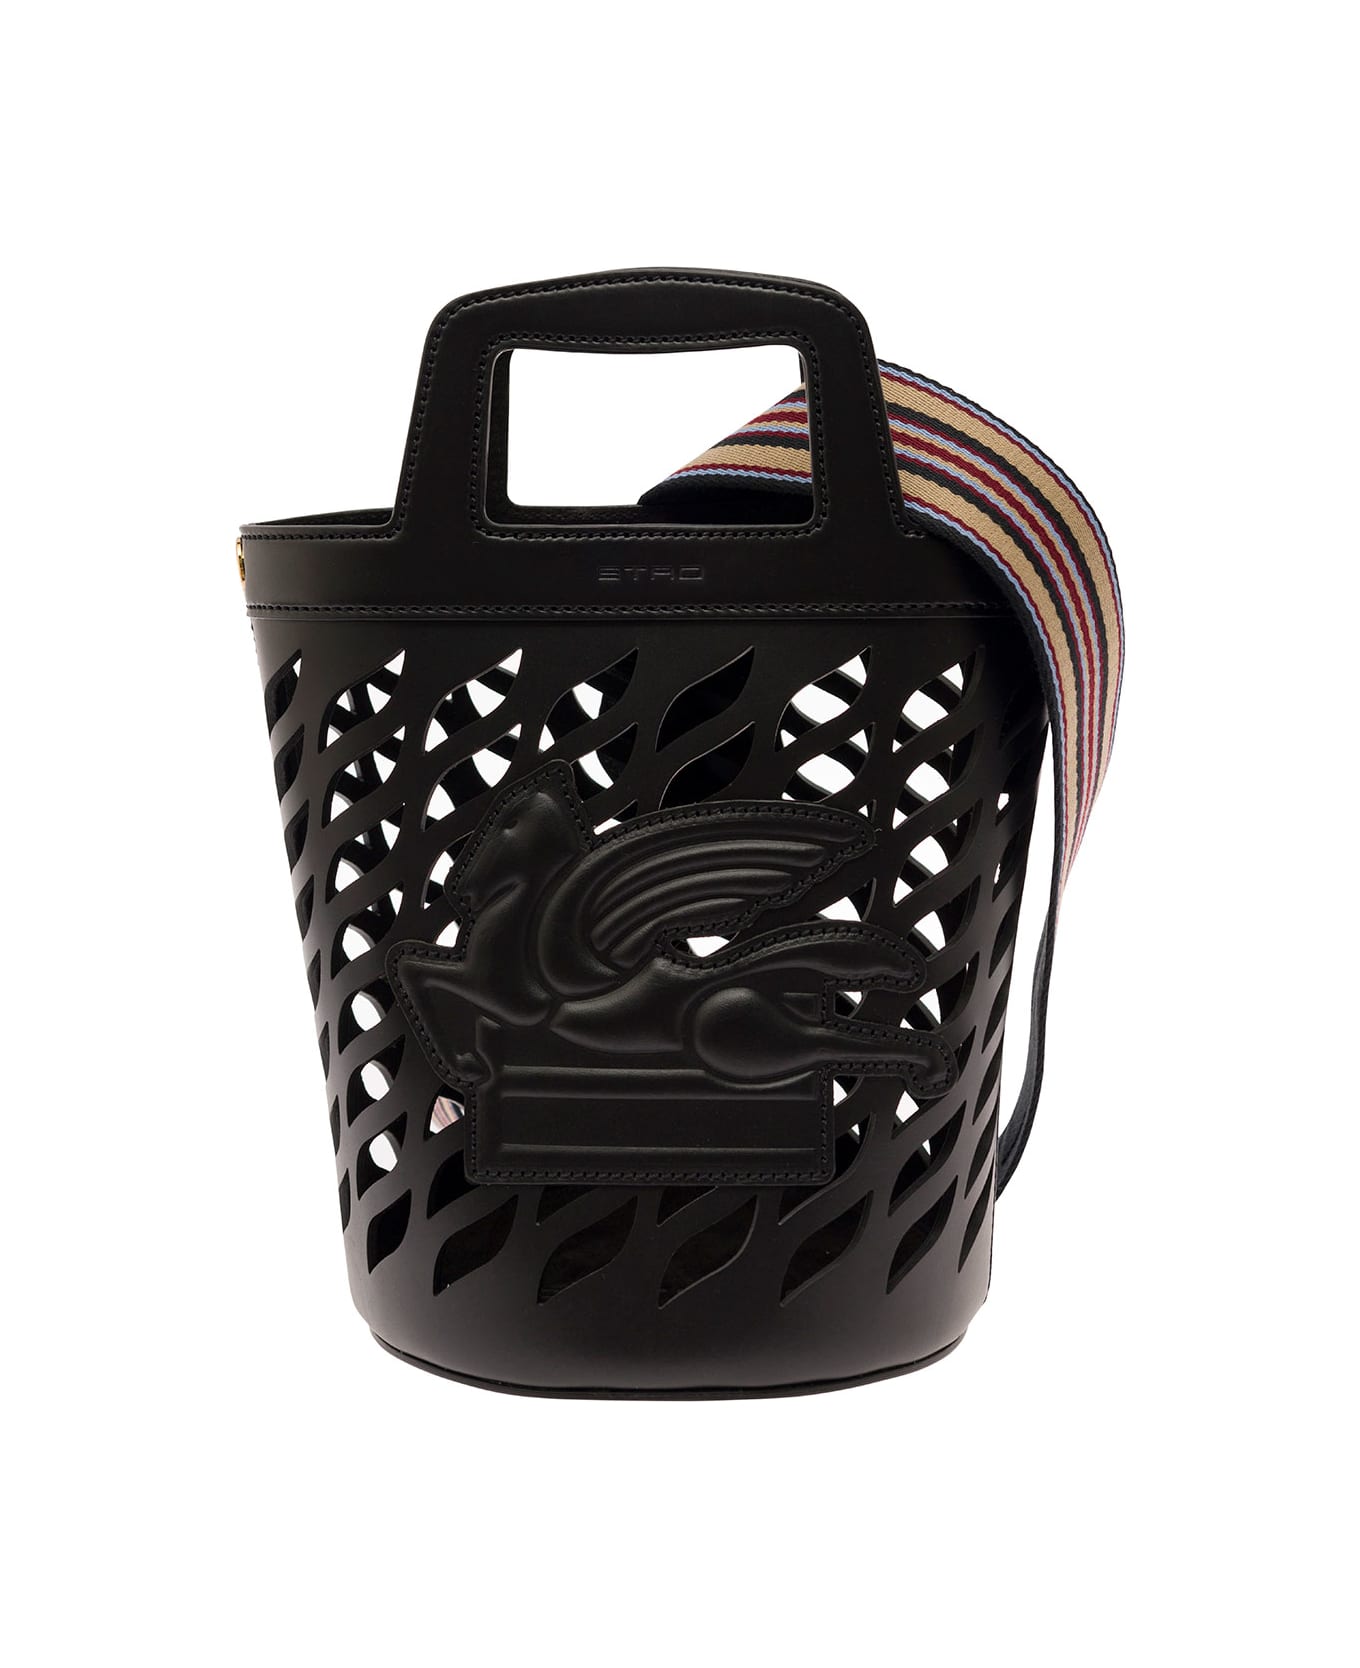 Etro Black Bucket Bag With Multicolor Shoulder Strap And Pegasus Detail In Perforated Leather Woman - Black